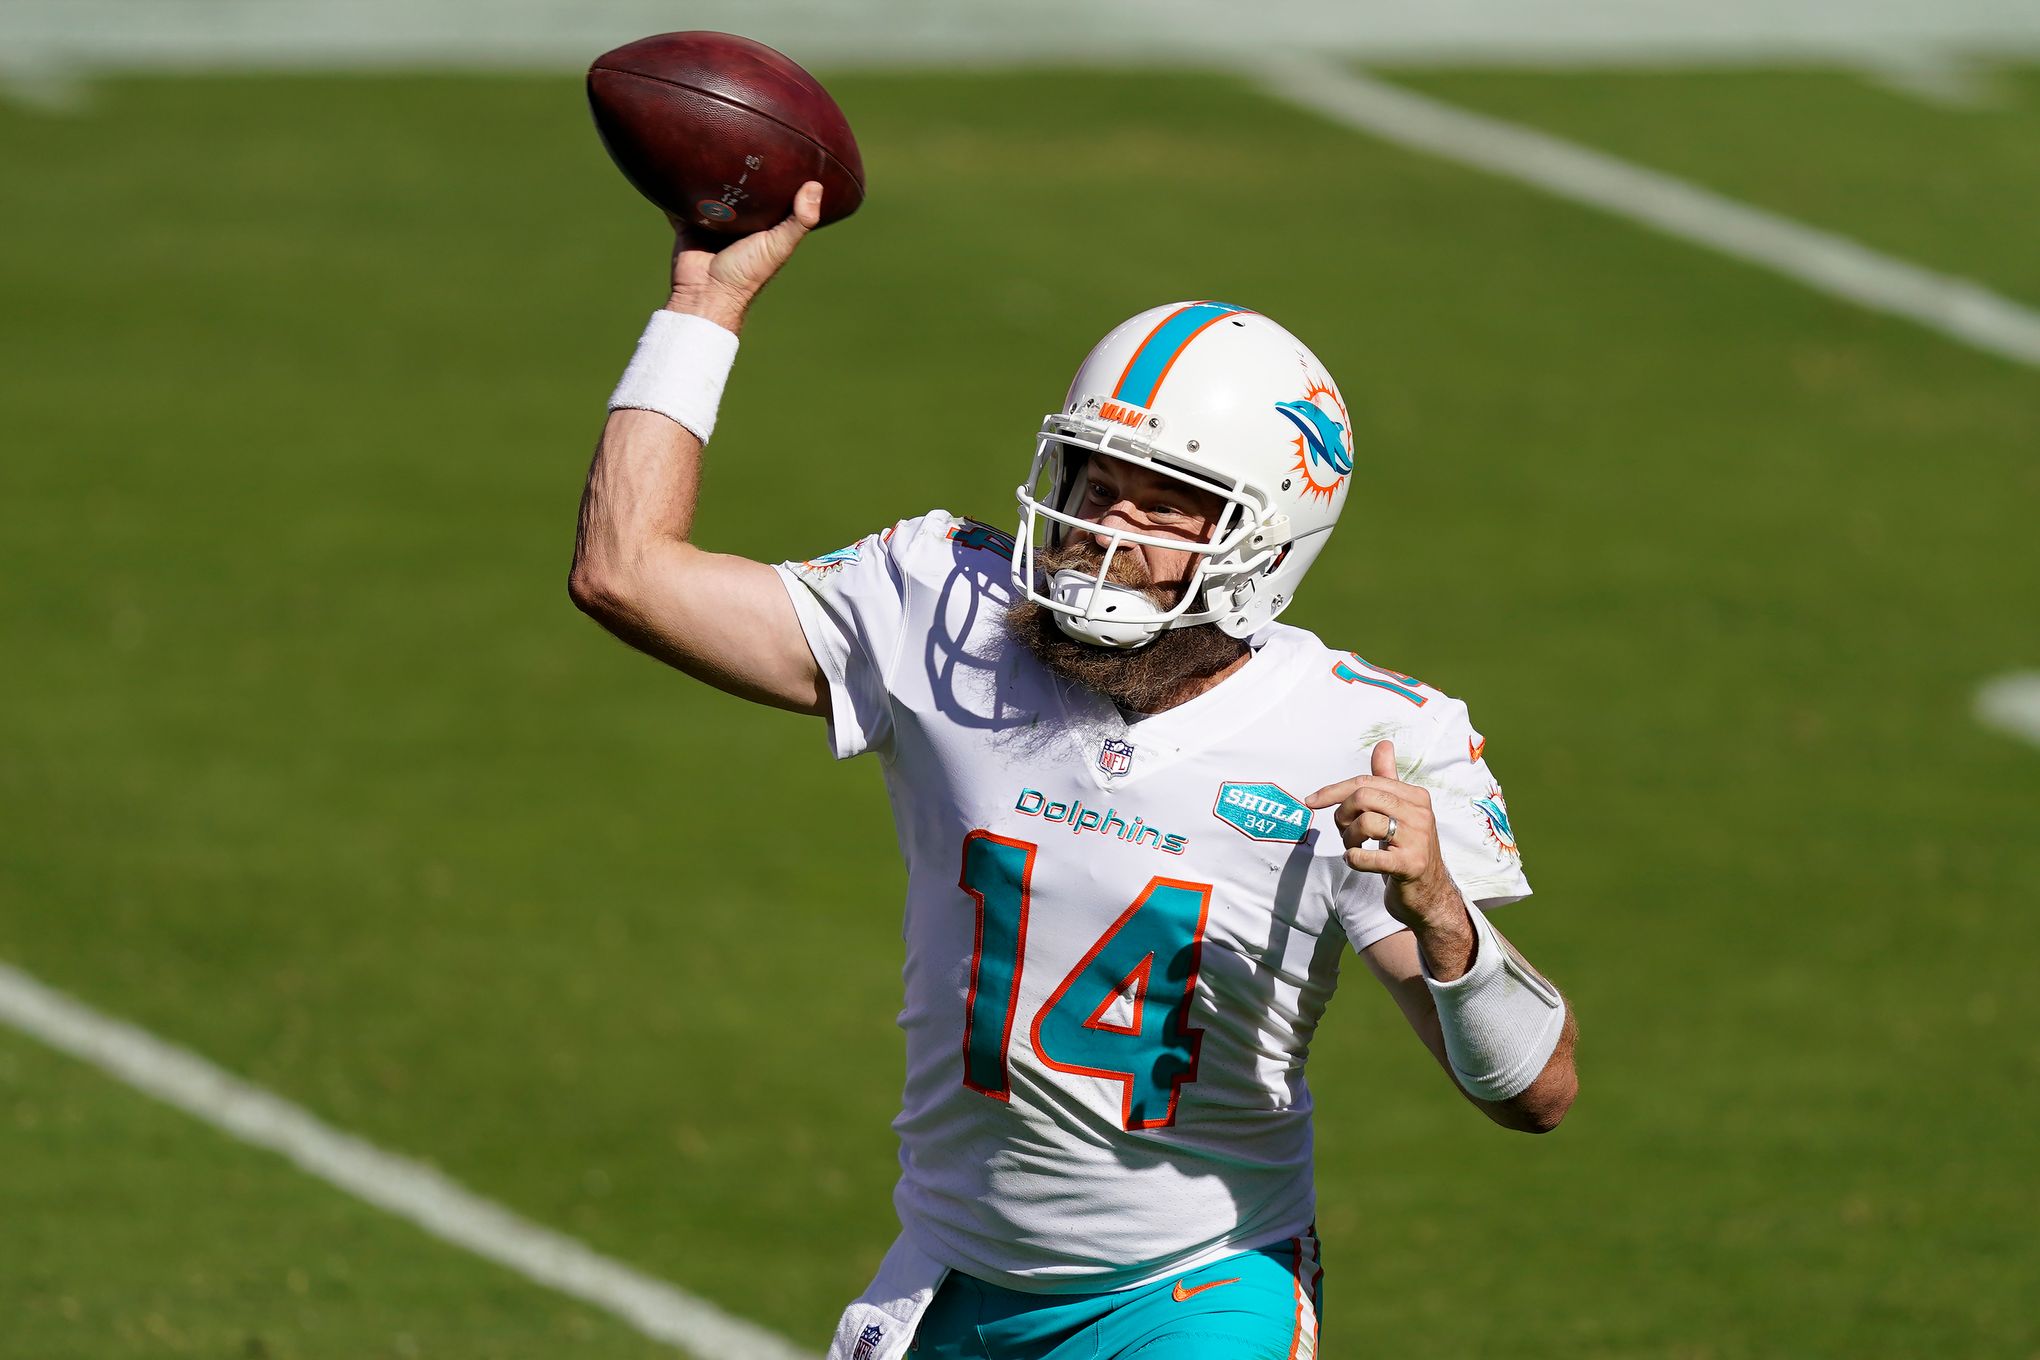 Fitzpatrick's 3 TD passes lead Dolphins past 49ers 43-17